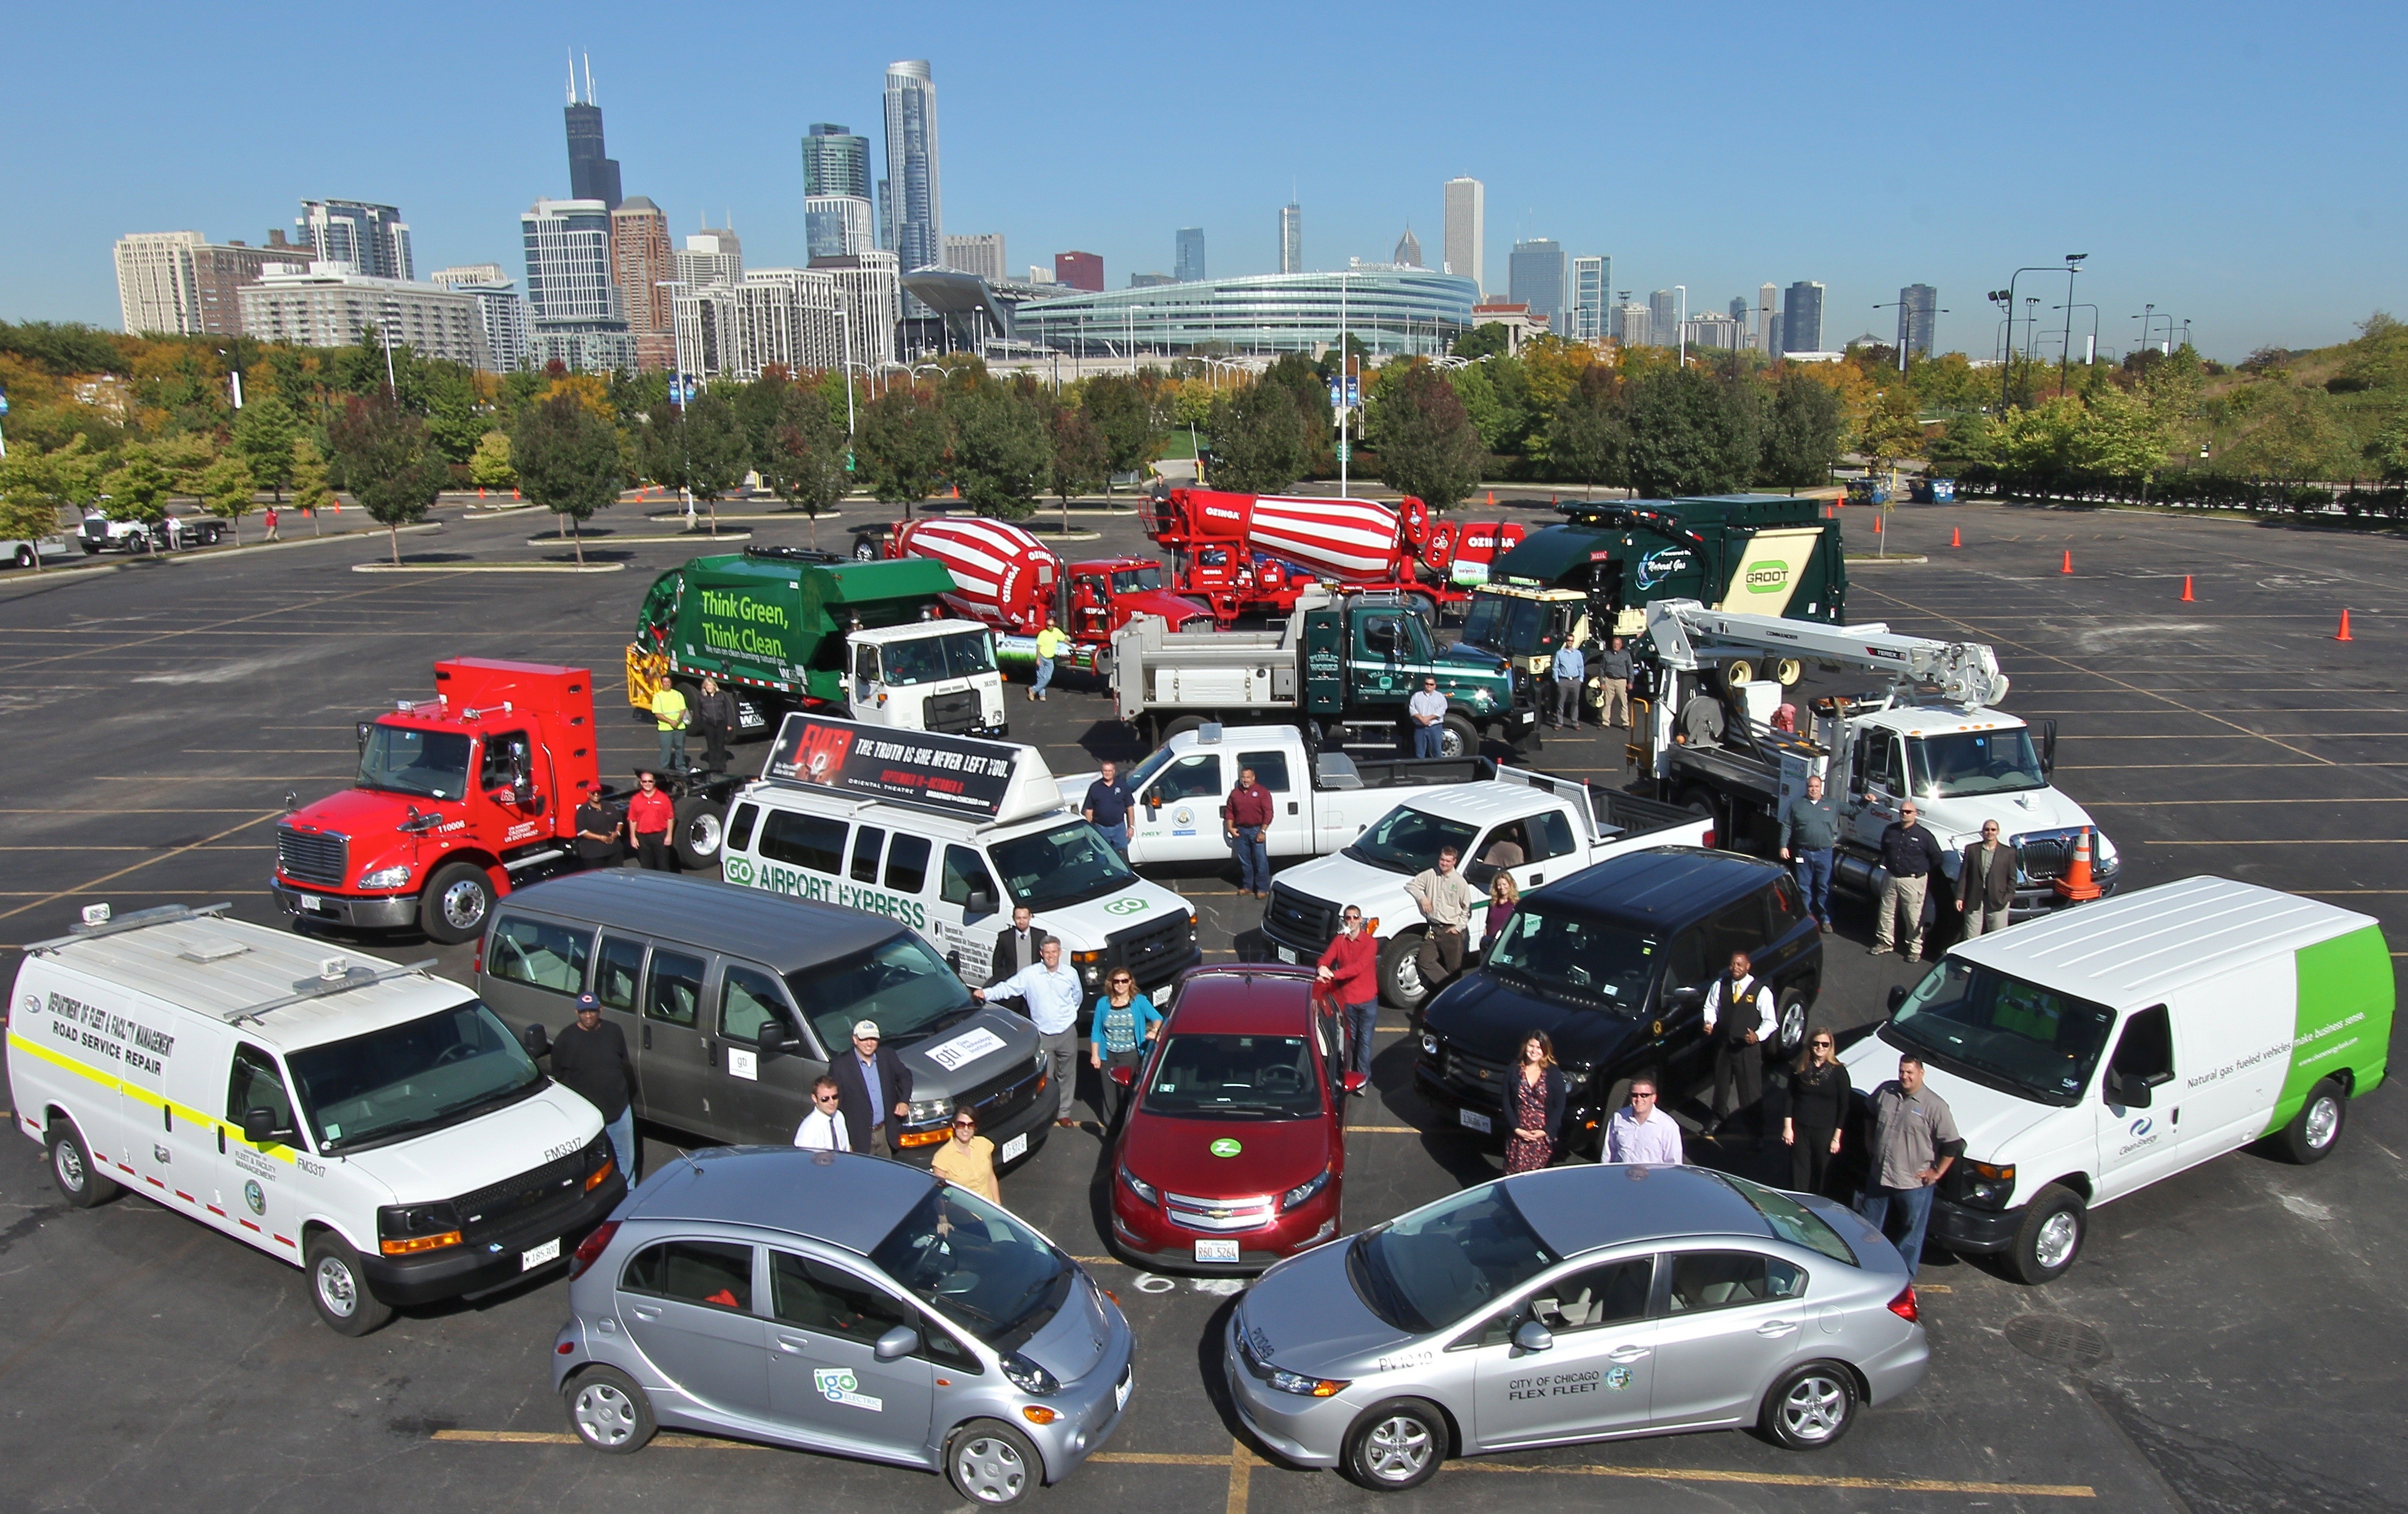 A group of alternative fuel vehicles in a parking lot with the Chicago skyline in the background